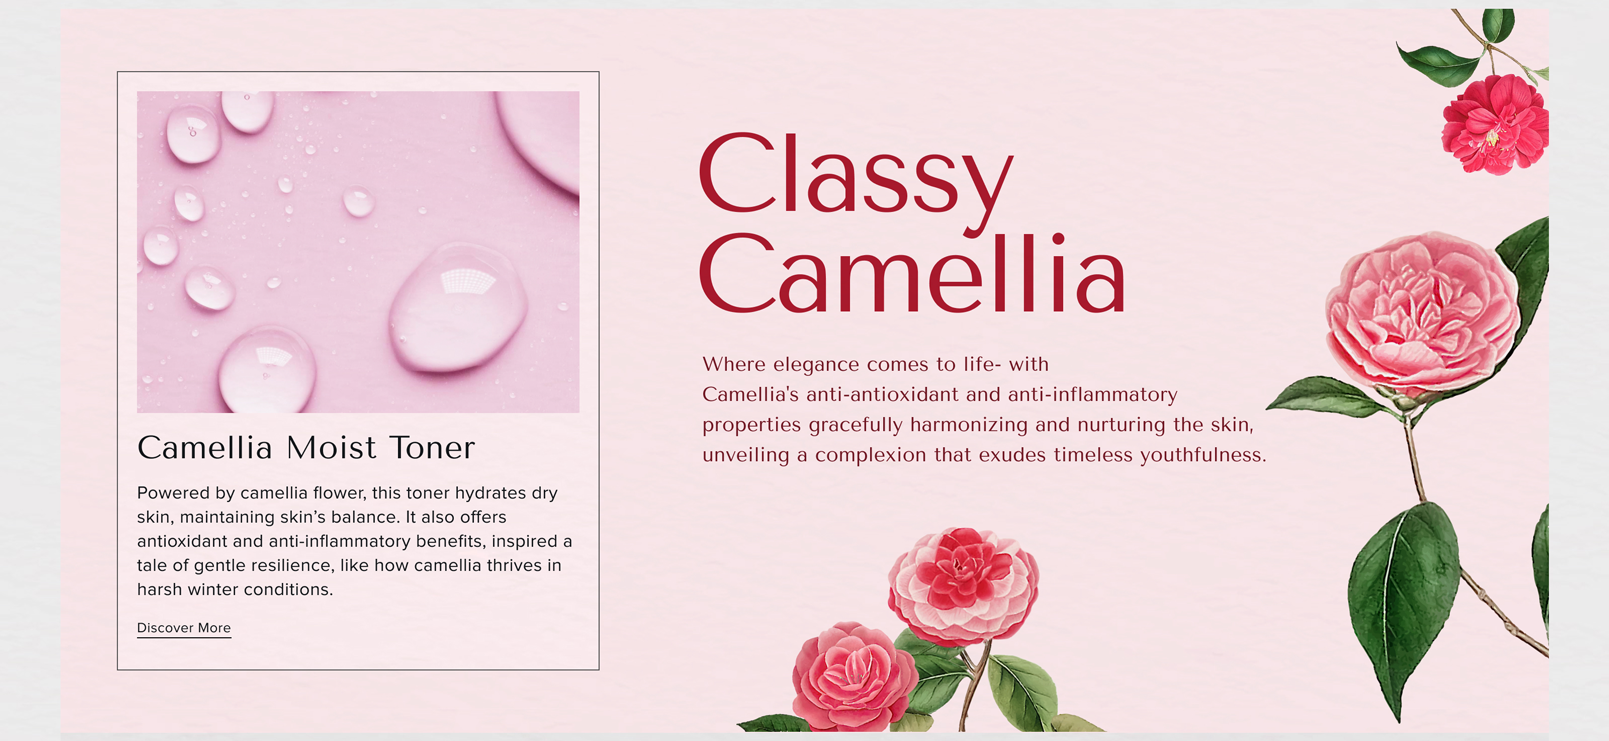 Classy Camellia Where elegance comes to life- with Camellia's anti-antioxidant and anti-inflammatory properties gracefully harmonizing and nurturing the skin, unveiling a complexion that exudes timeless youthfulness. - Camellia Moist Toner